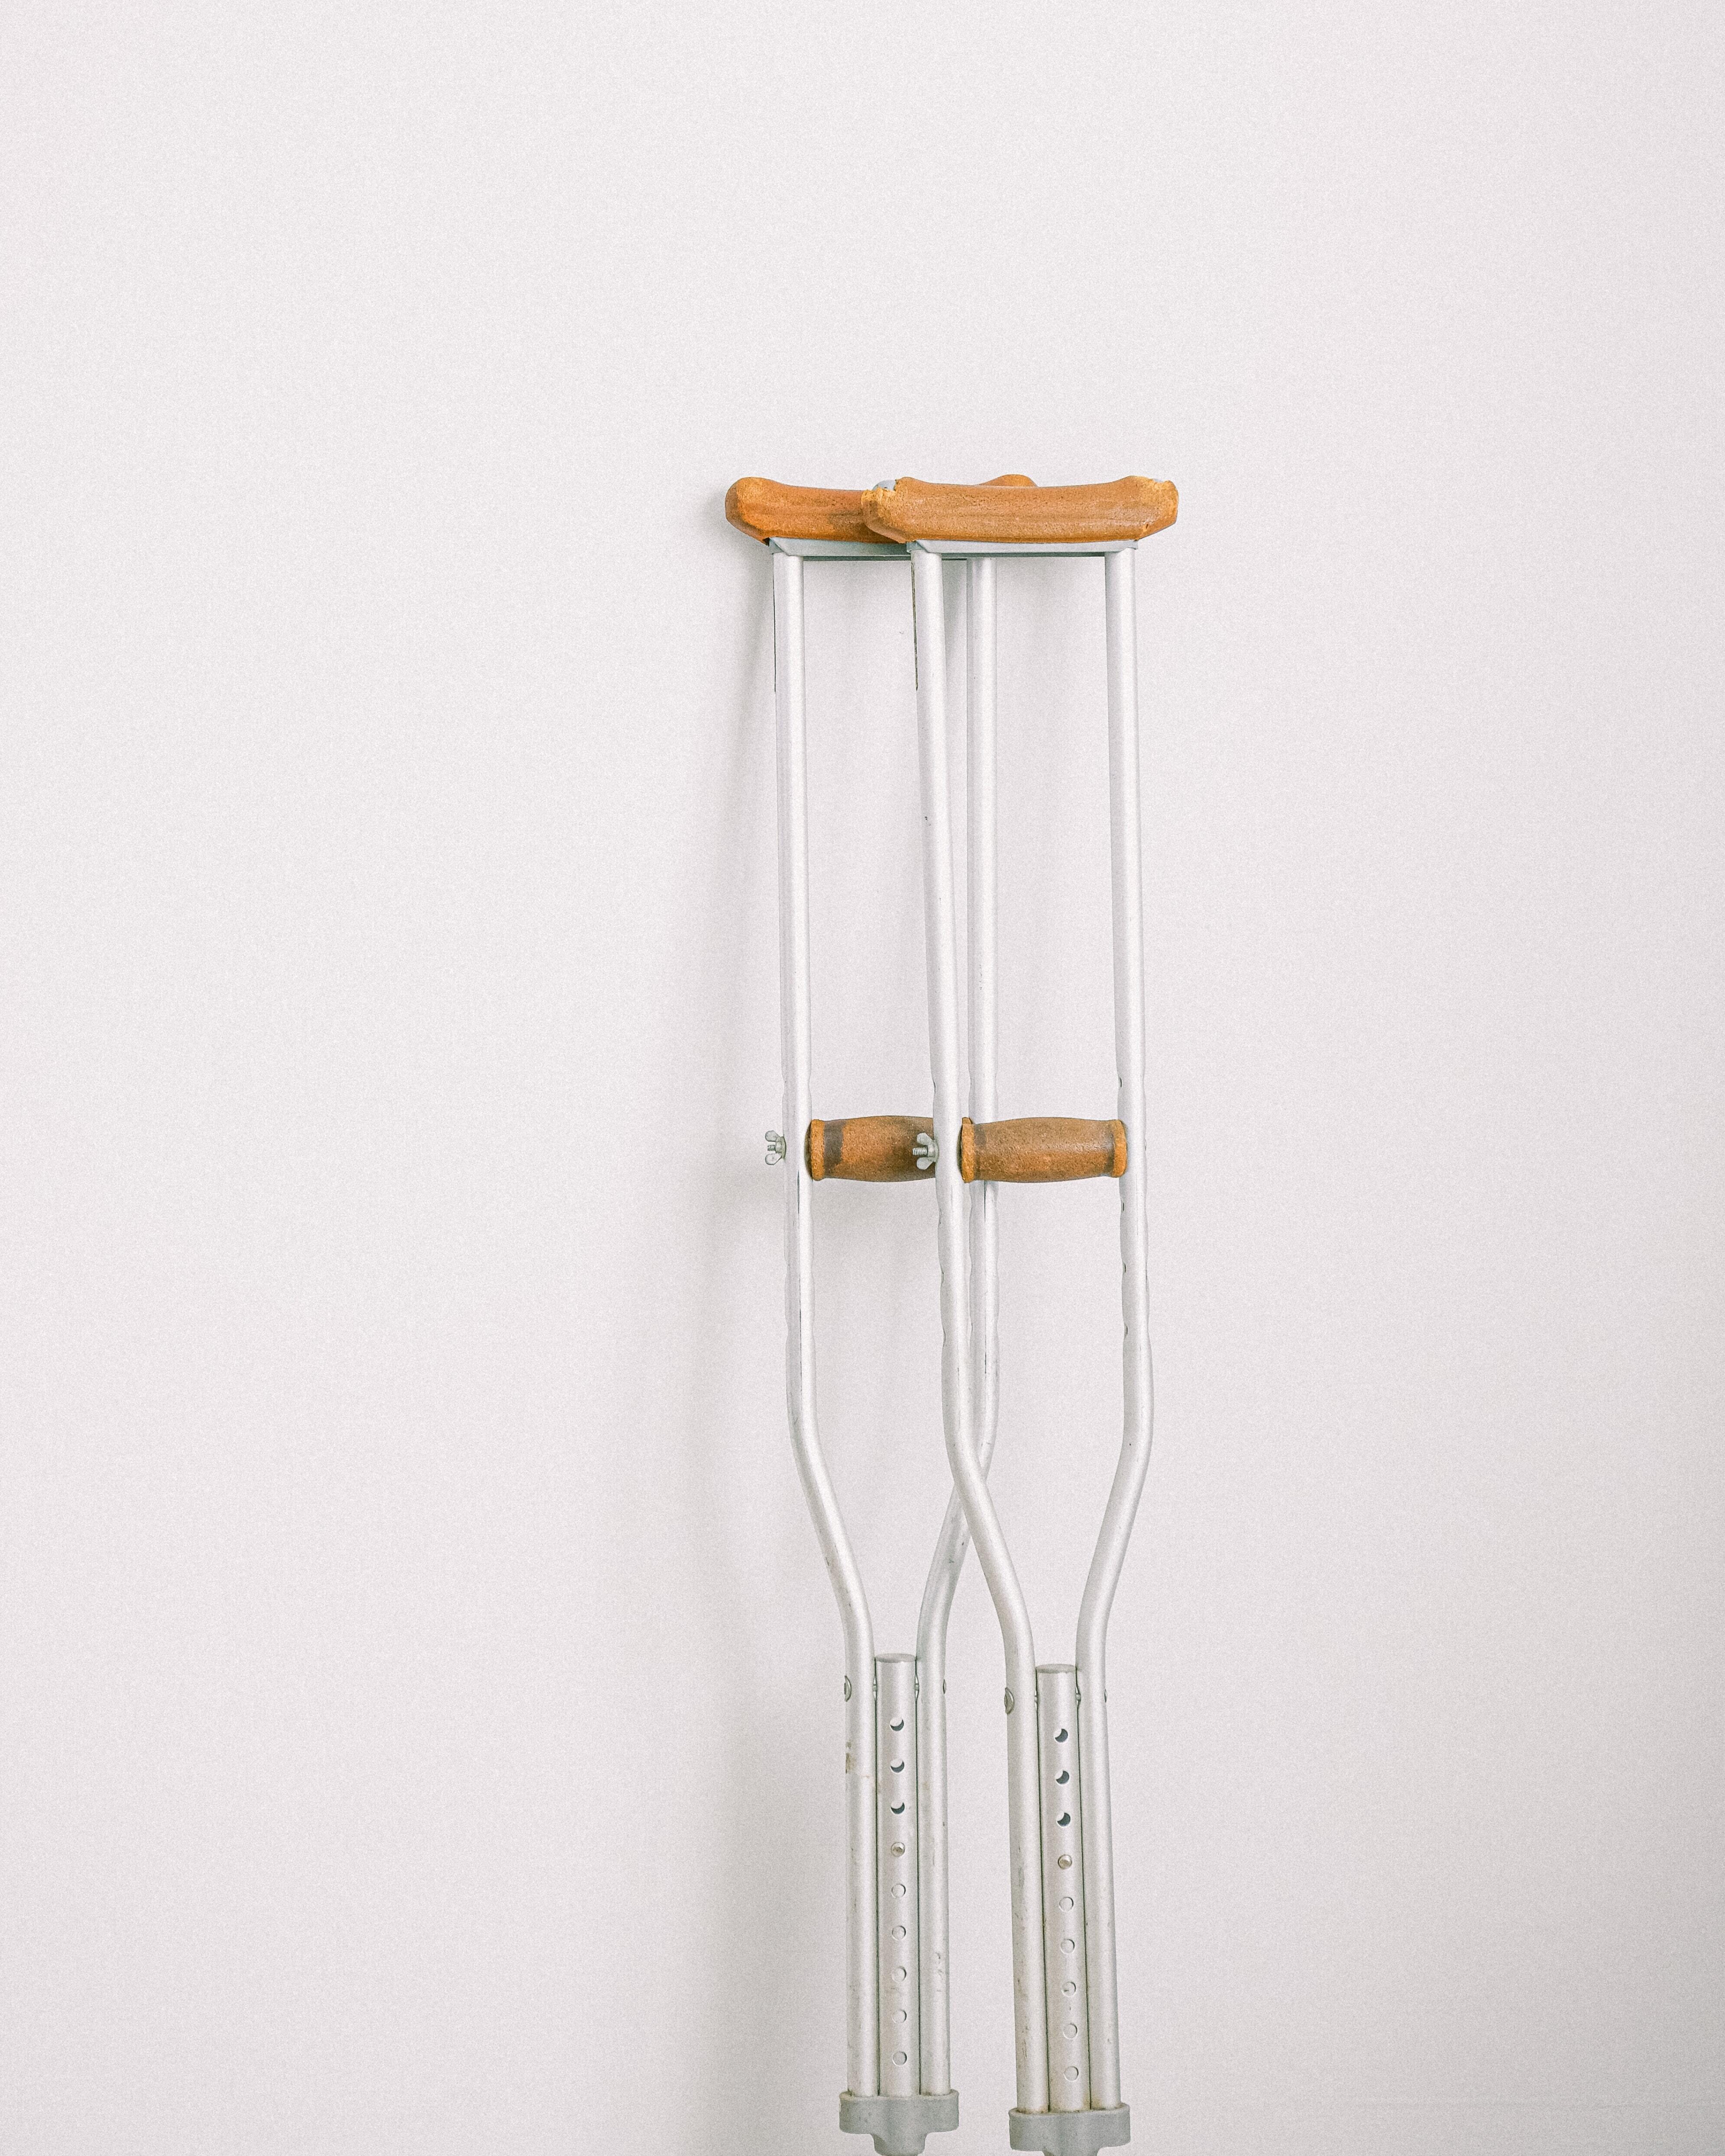 crutches for personal injury